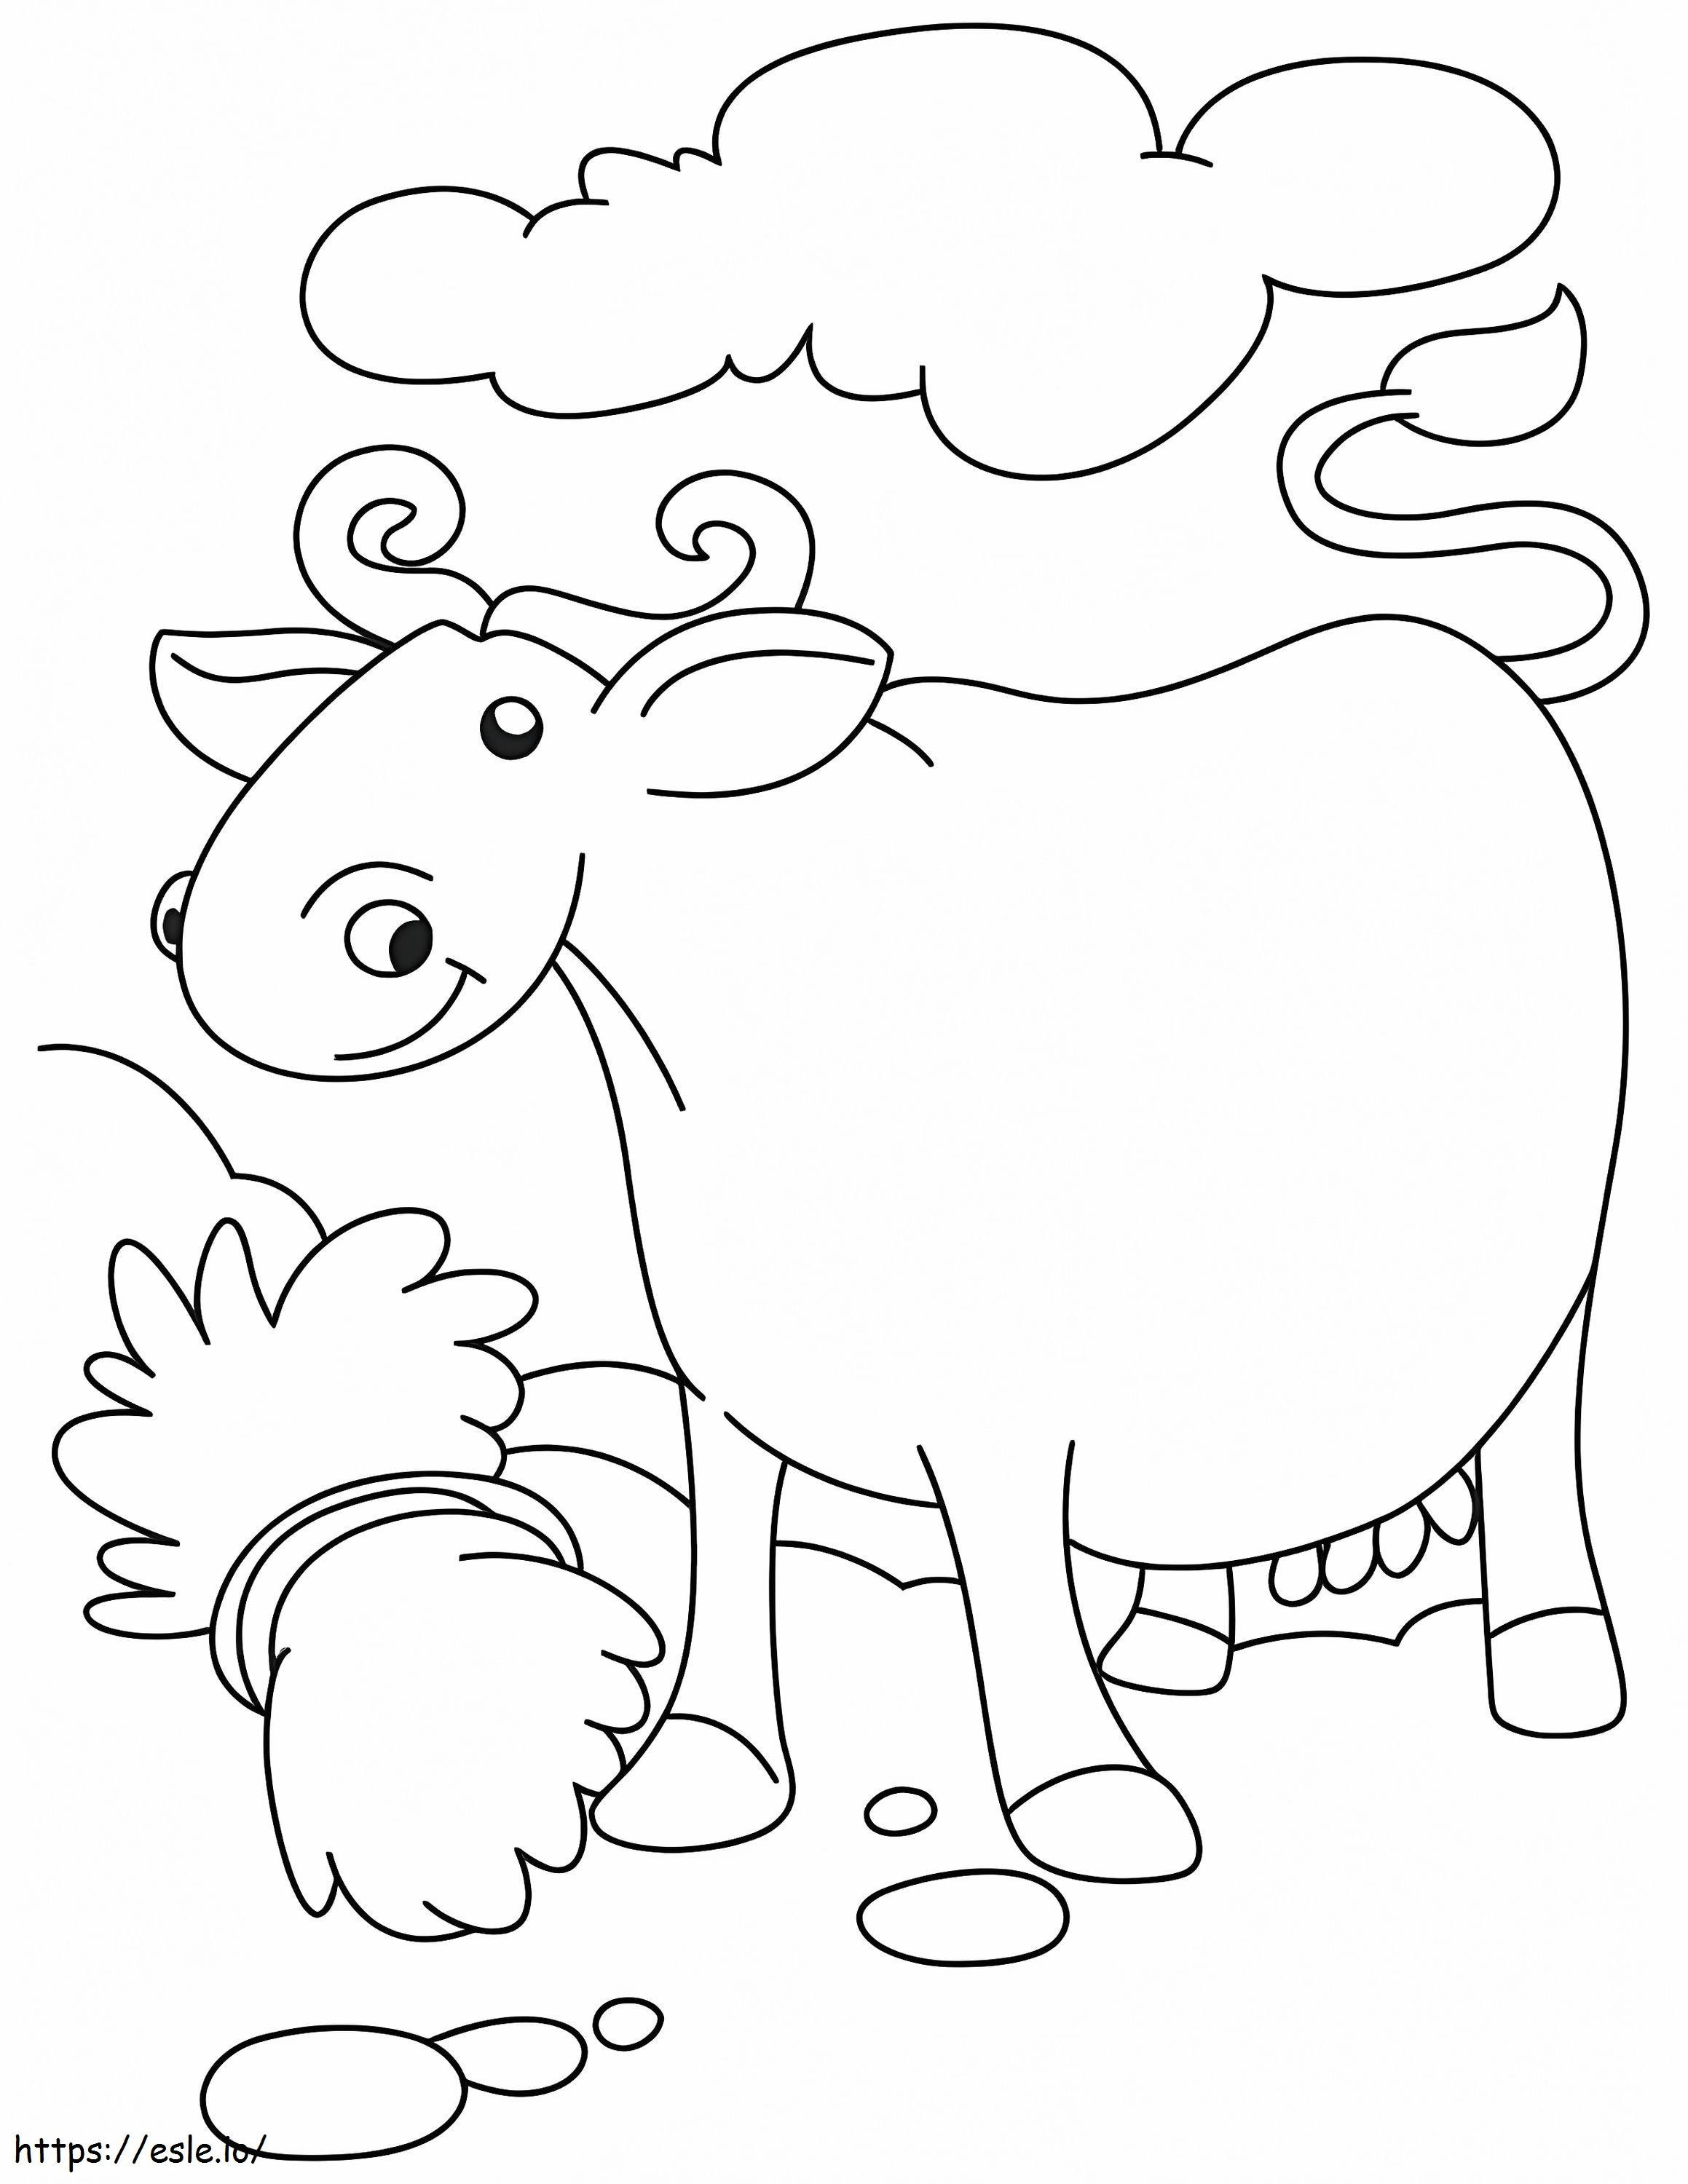 Smiling Buffalo With Grass coloring page